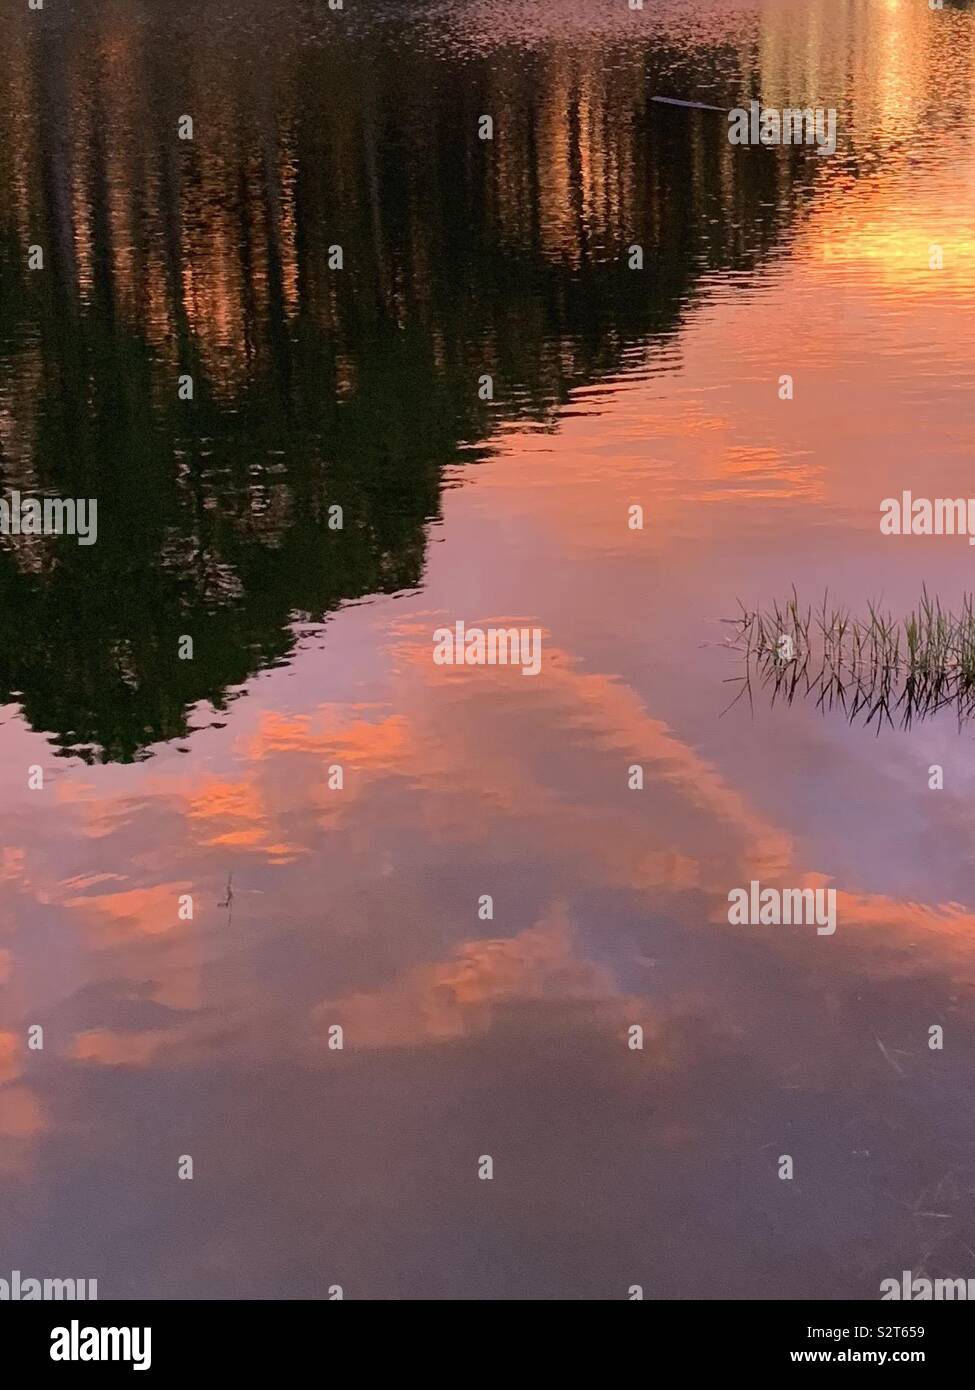 Reflections of sunset colors on water Stock Photo